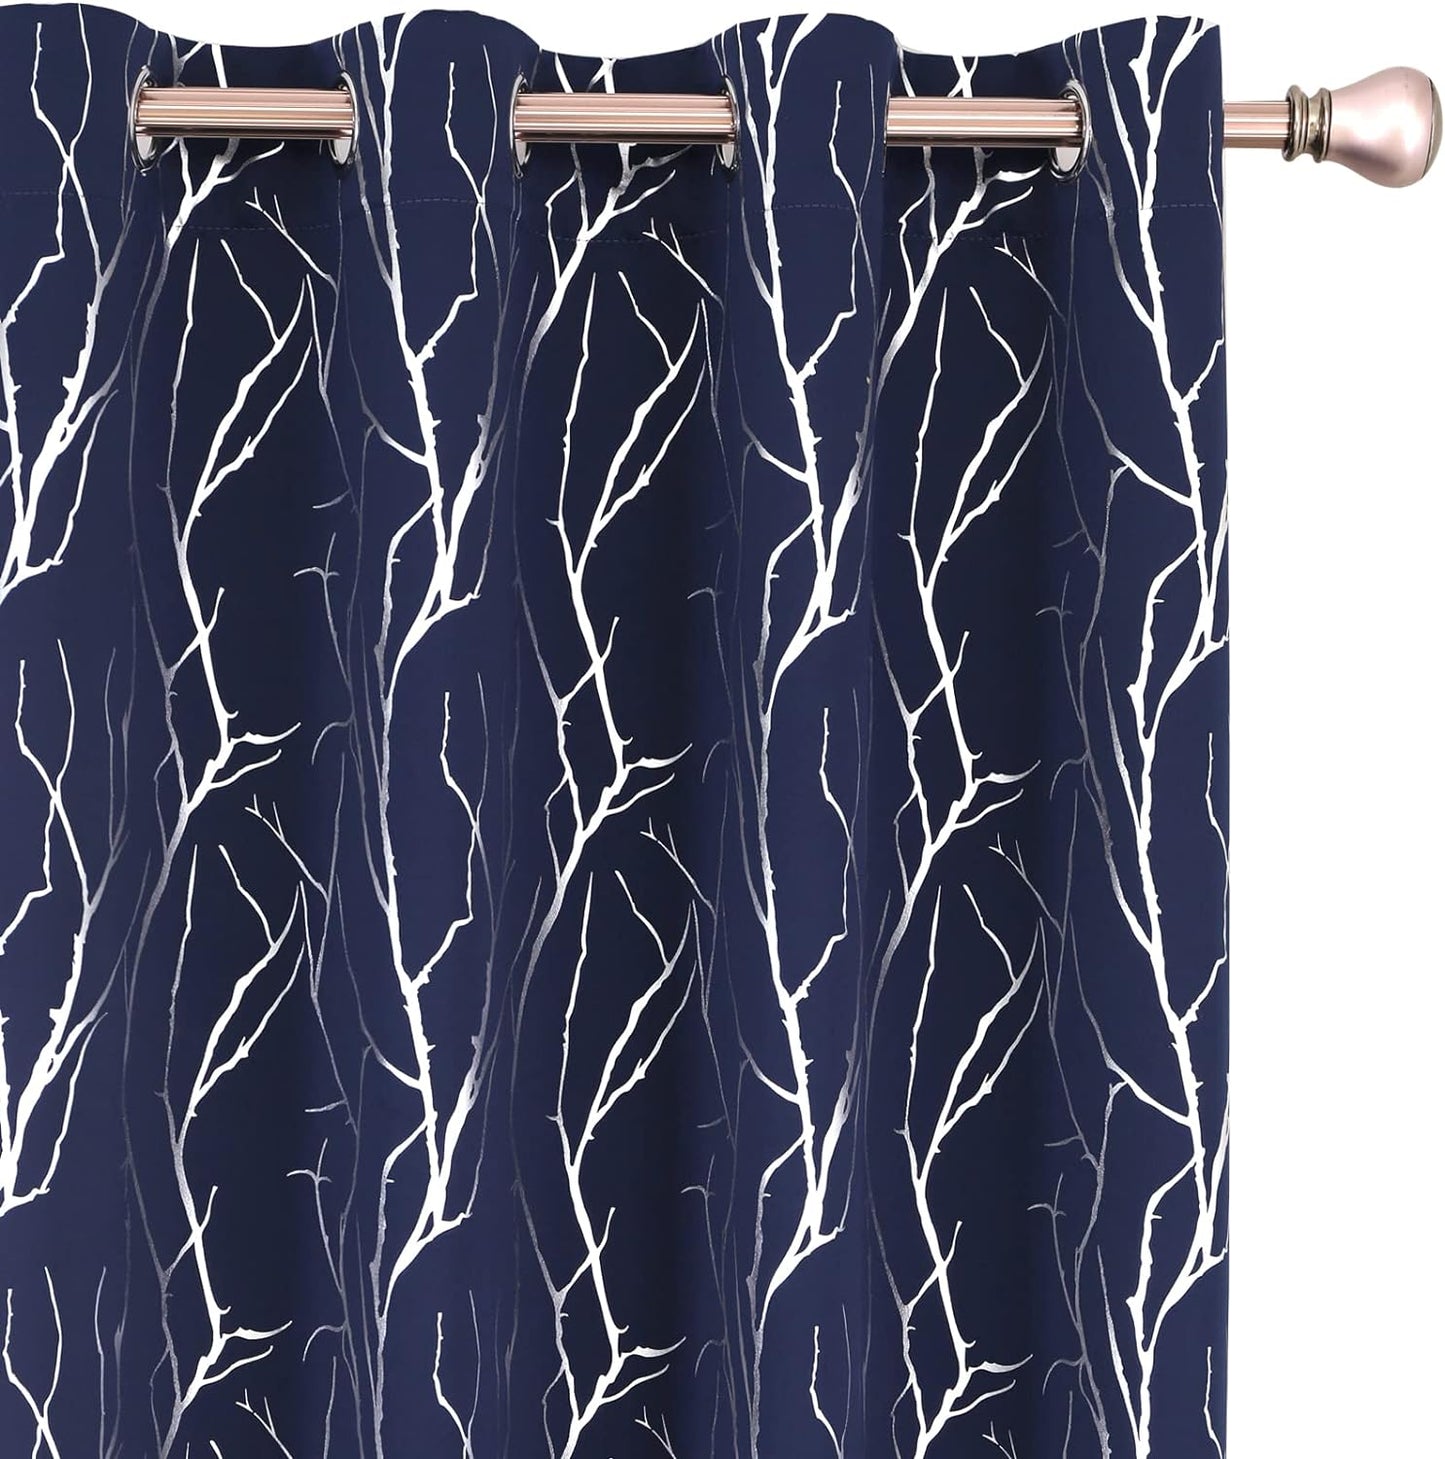 SMILE WEAVER Black Blackout Curtains for Bedroom 72 Inch Long 2 Panels,Room Darkening Curtain with Gold Print Design Noise Reducing Thermal Insulated Window Treatment Drapes for Living Room  SMILE WEAVER Tree Branch-Navy 52Wx63L 